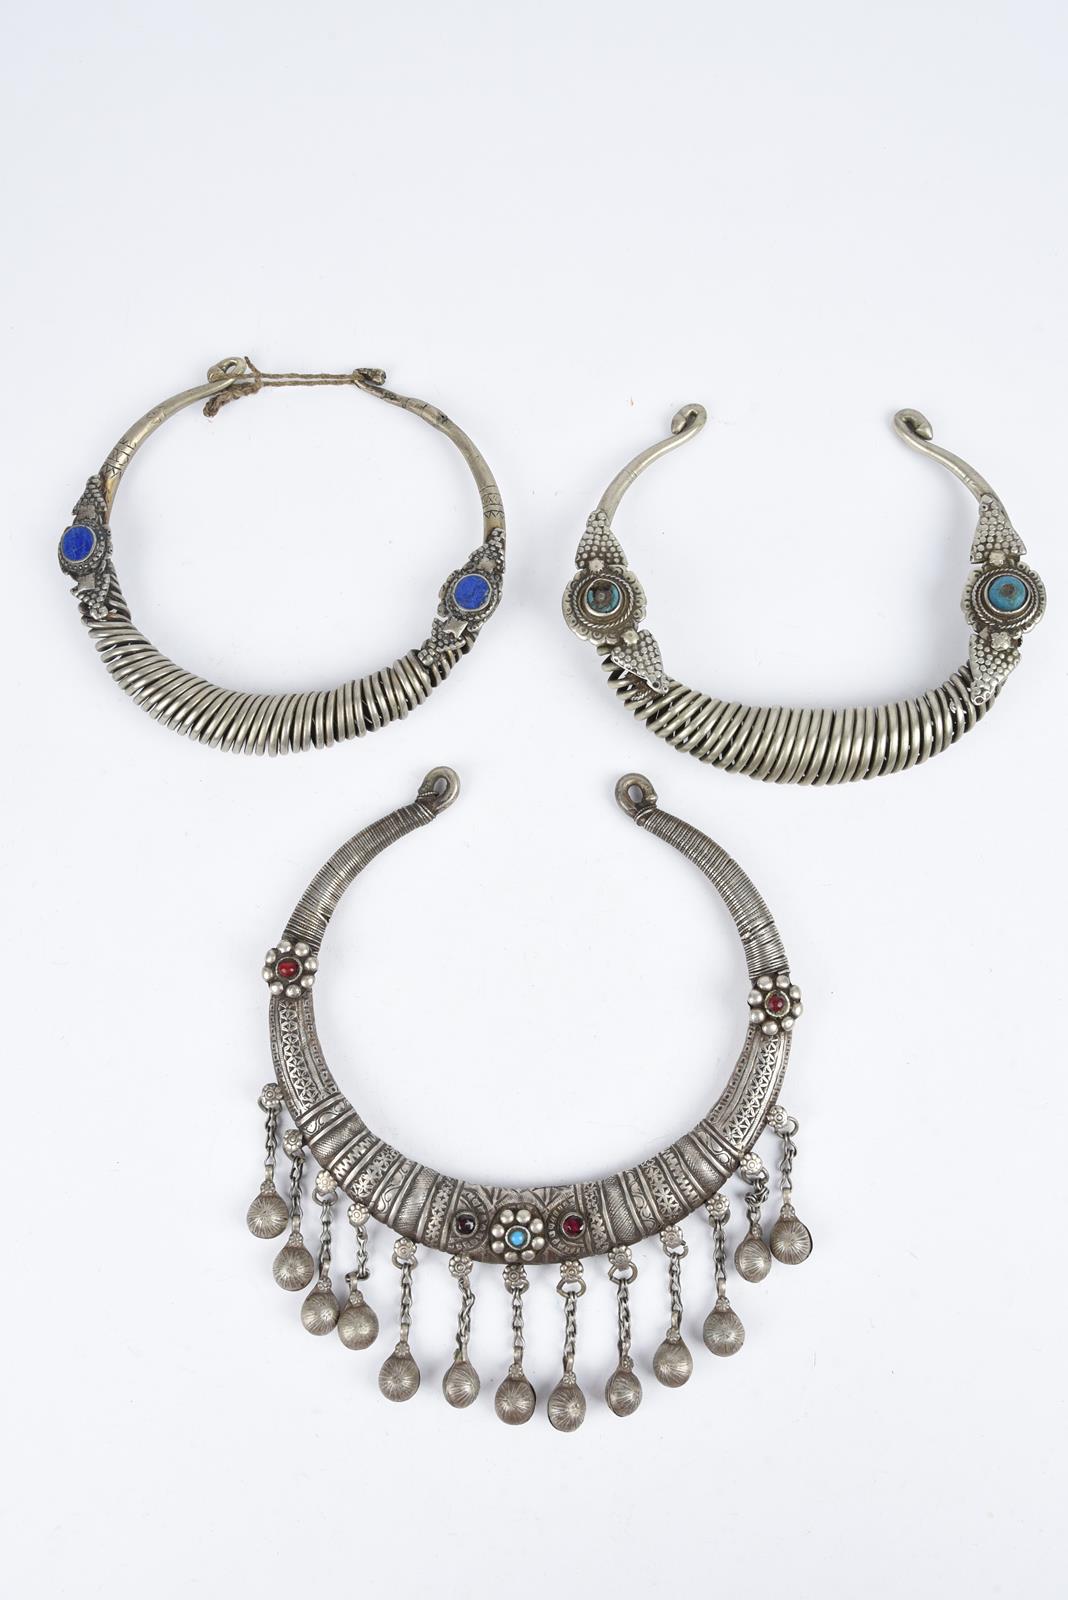 Three Nuristan torques silver coloured metal with applied blue stone and red and blue glass beads, - Image 2 of 19